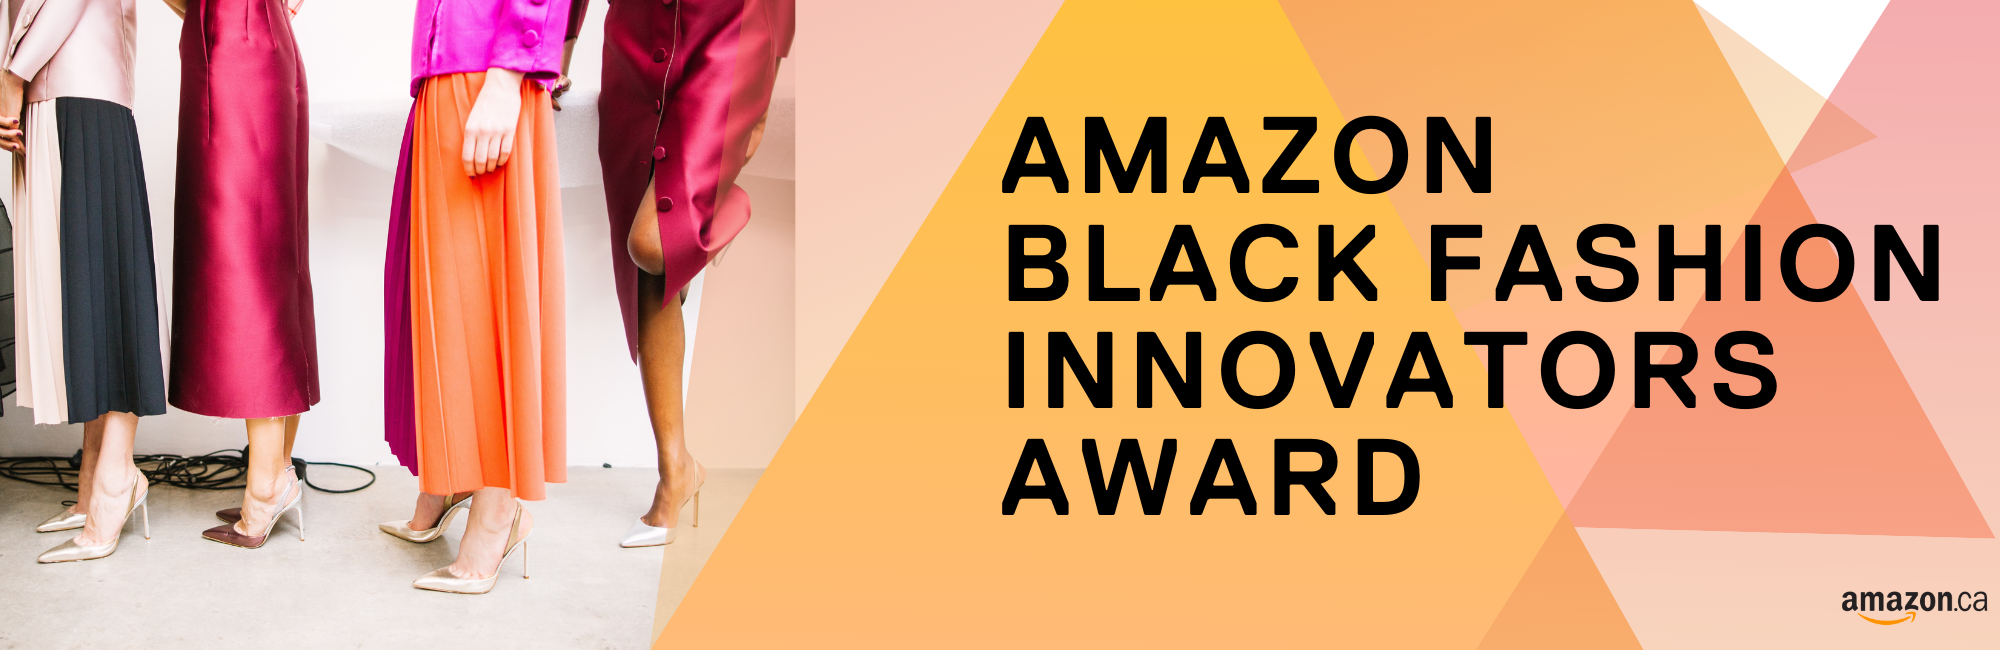 Amazon Award Banner with people in fashion clothing 